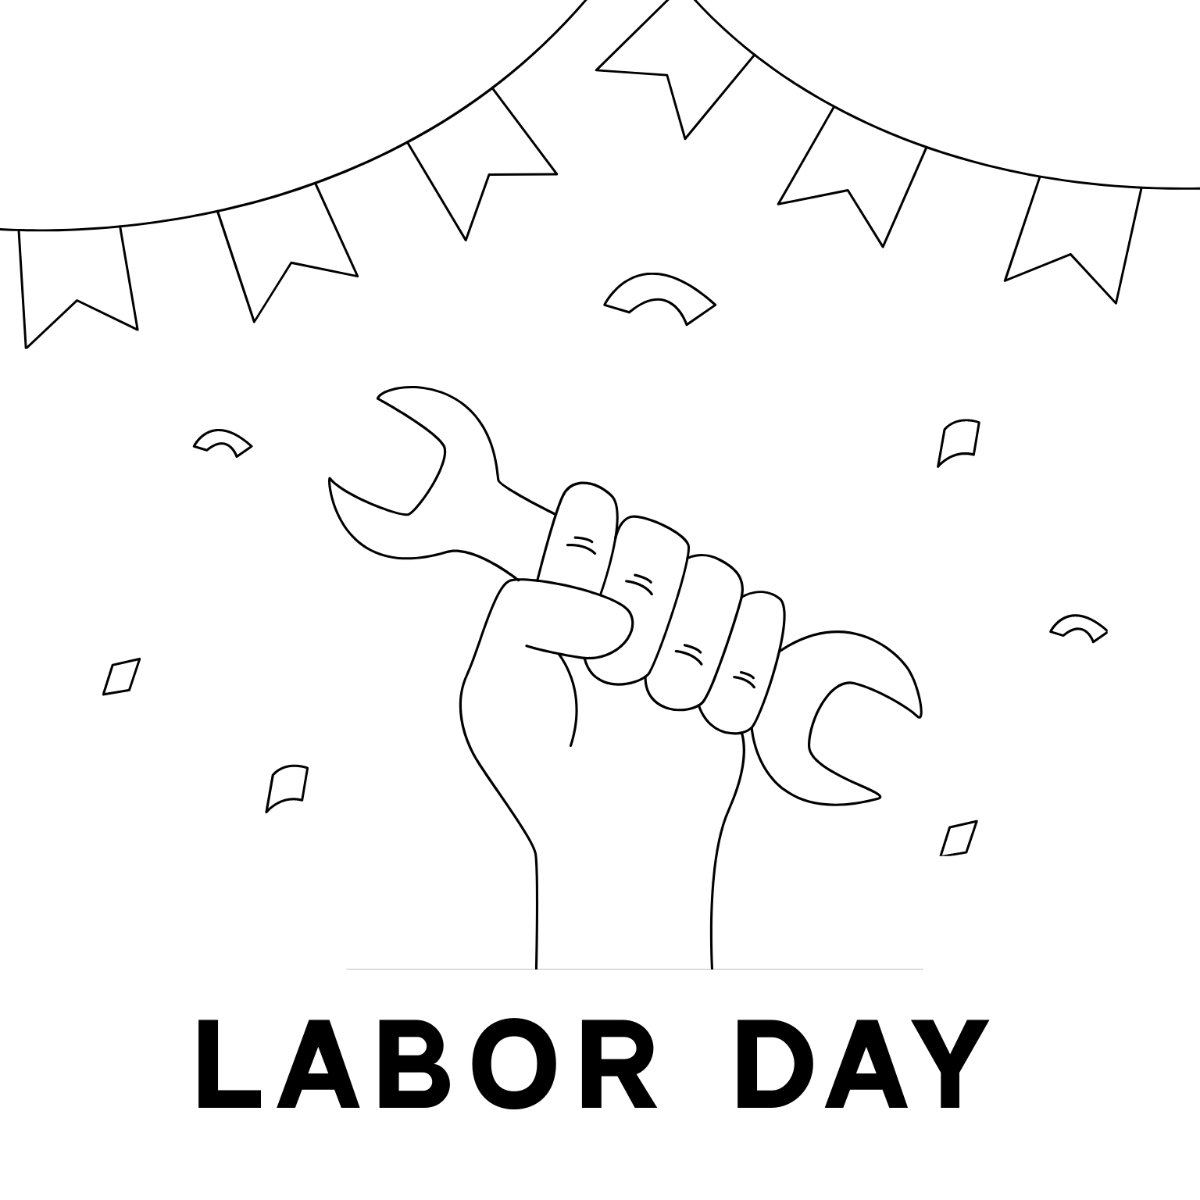 FREE Labor Day Templates & Examples - Edit Online & Download | Template.net